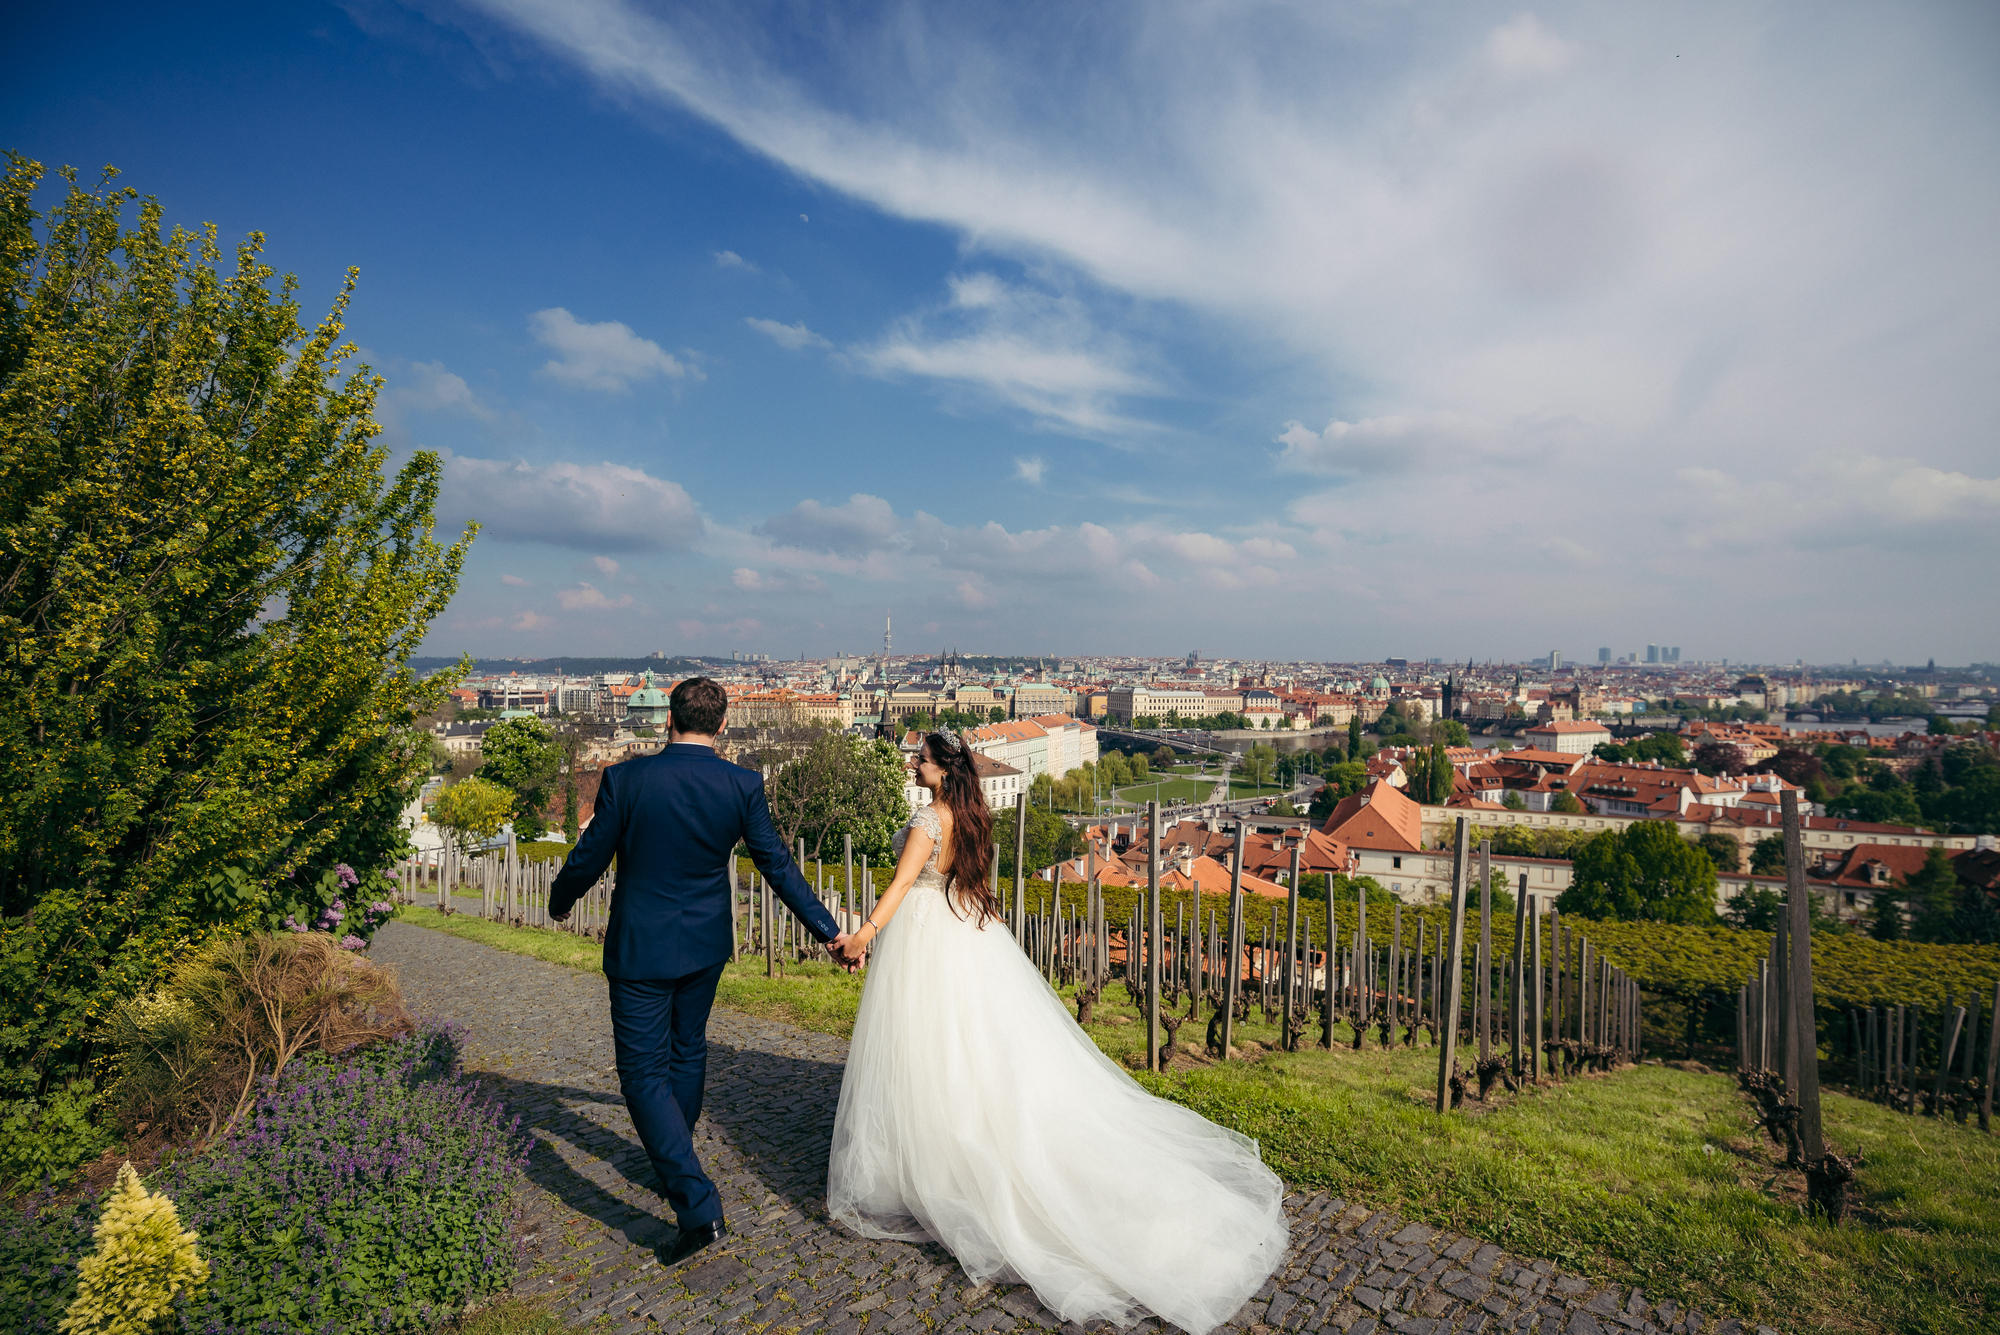 The back view of the newlyweds holding hands and walking along the paving road under the beautiful sky. Prague panorama